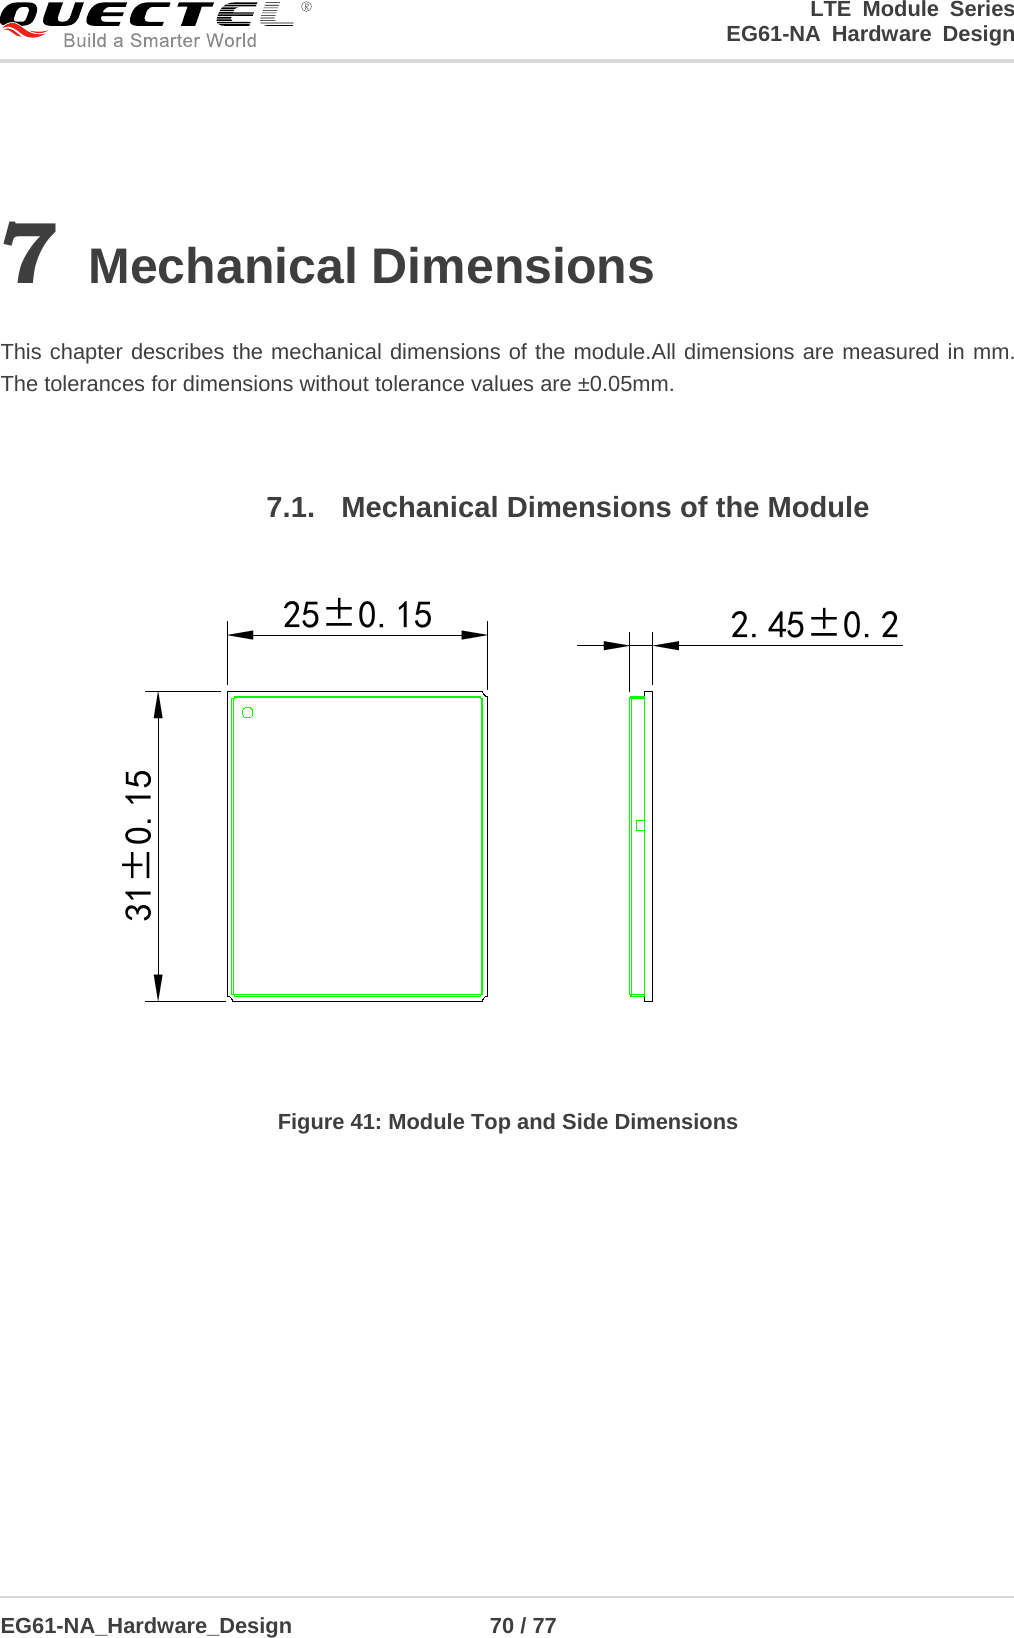 LTE Module Series                                                  EG61-NA Hardware Design  EG61-NA_Hardware_Design                  70 / 77    7 Mechanical Dimensions  This chapter describes the mechanical dimensions of the module.All dimensions are measured in mm. The tolerances for dimensions without tolerance values are ±0.05mm.  7.1. Mechanical Dimensions of the Module 25±0.1531±0.15 2.45±0.2 Figure 41: Module Top and Side Dimensions  